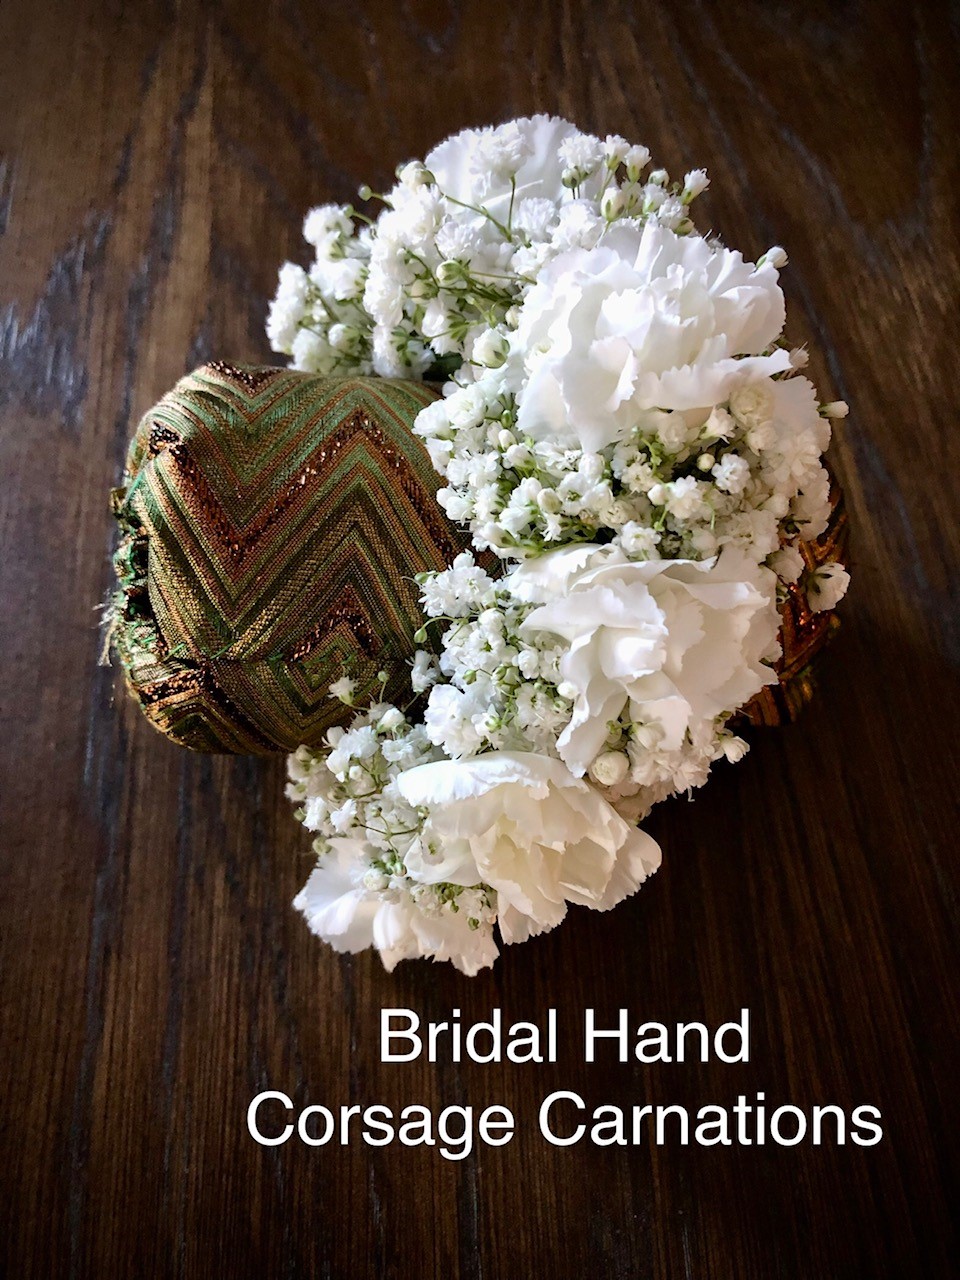 $22.50  each Bridal Hand corsage carnations  